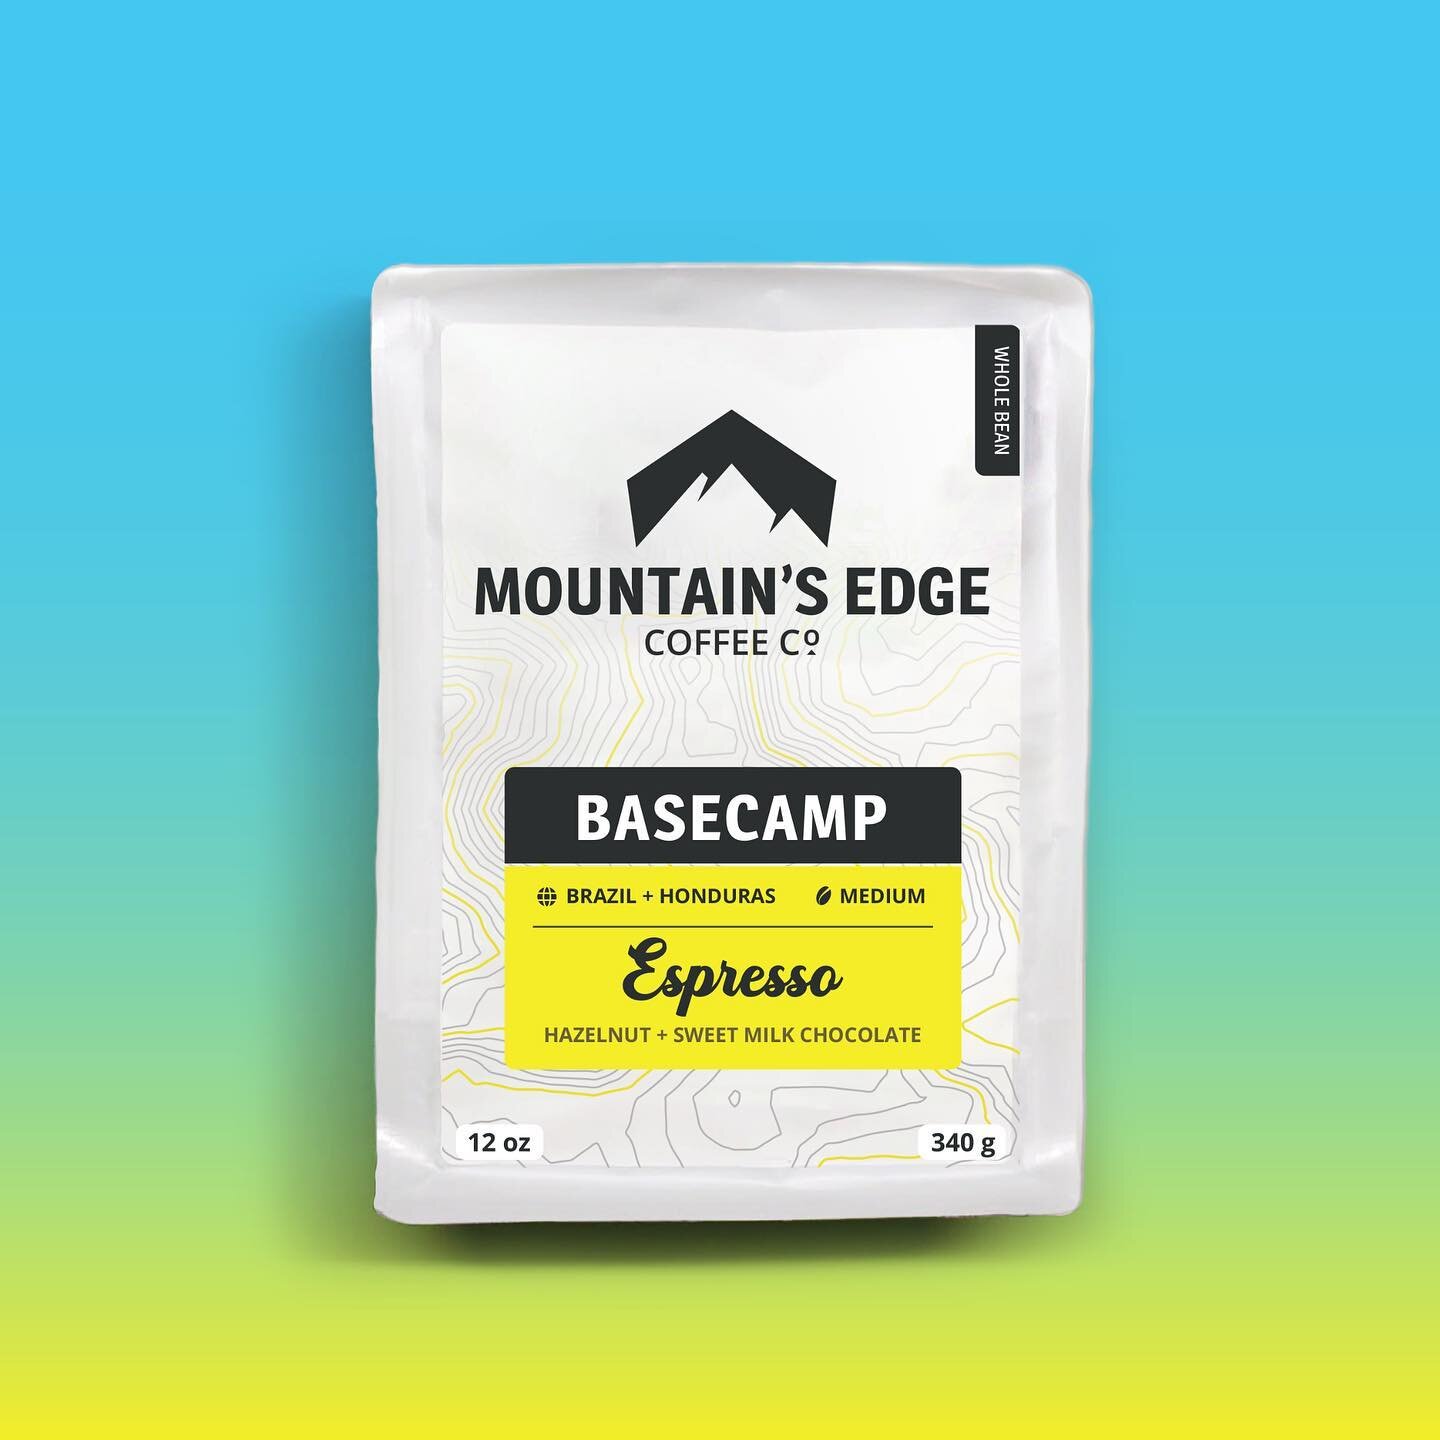 🏕Introducing BASECAMP!🏕
 
Espresso lovers behold! This roast is the first in our Basecamp line! With notes of hazelnut and sweet milk chocolate, you&rsquo;ll want to drink this one all day ☕️. 

We can&rsquo;t wait to for you to pull your first sho